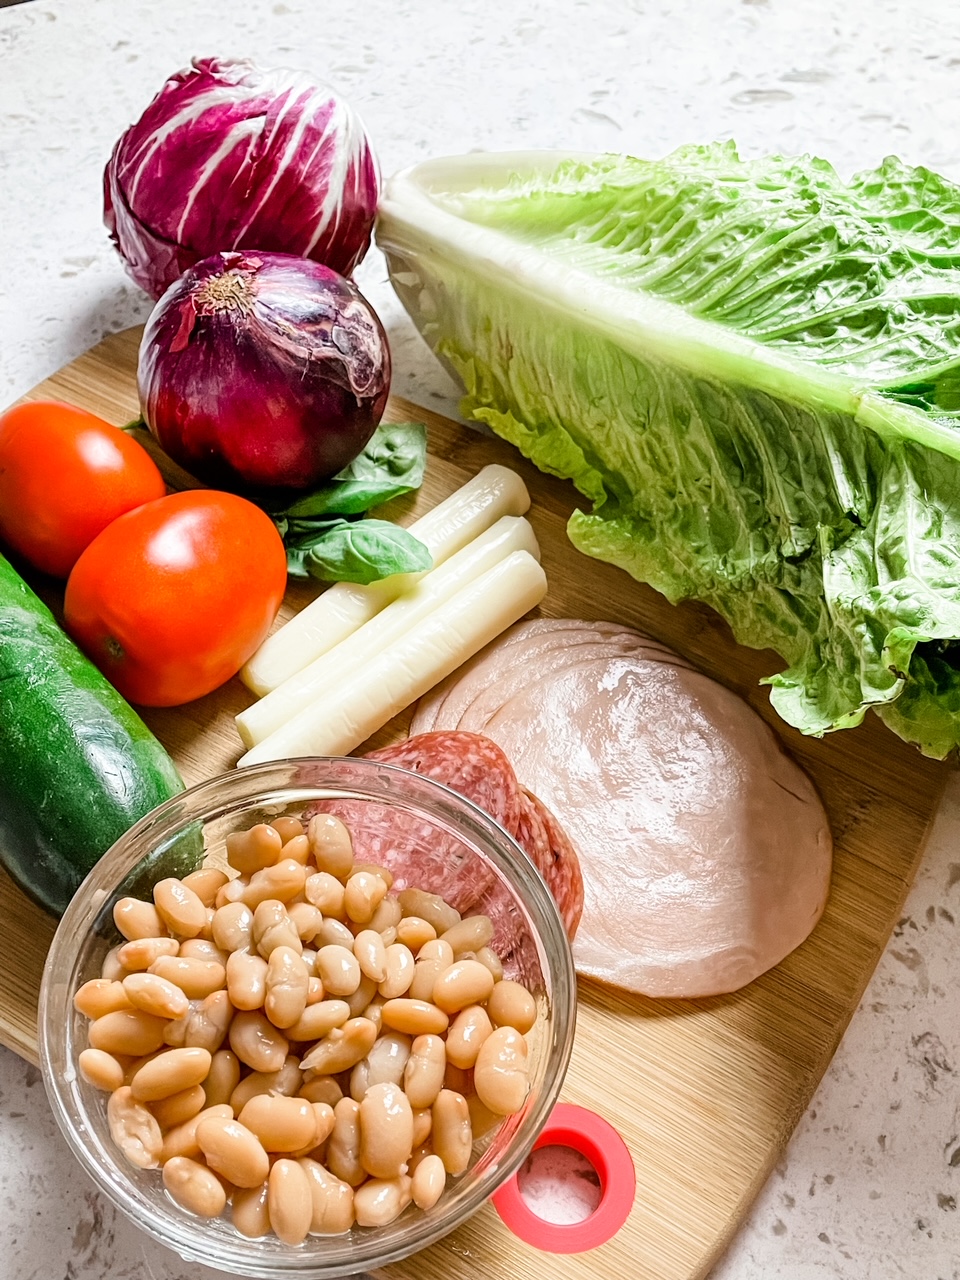 The ingredients on a cutting board - vegetables, salami, and beans